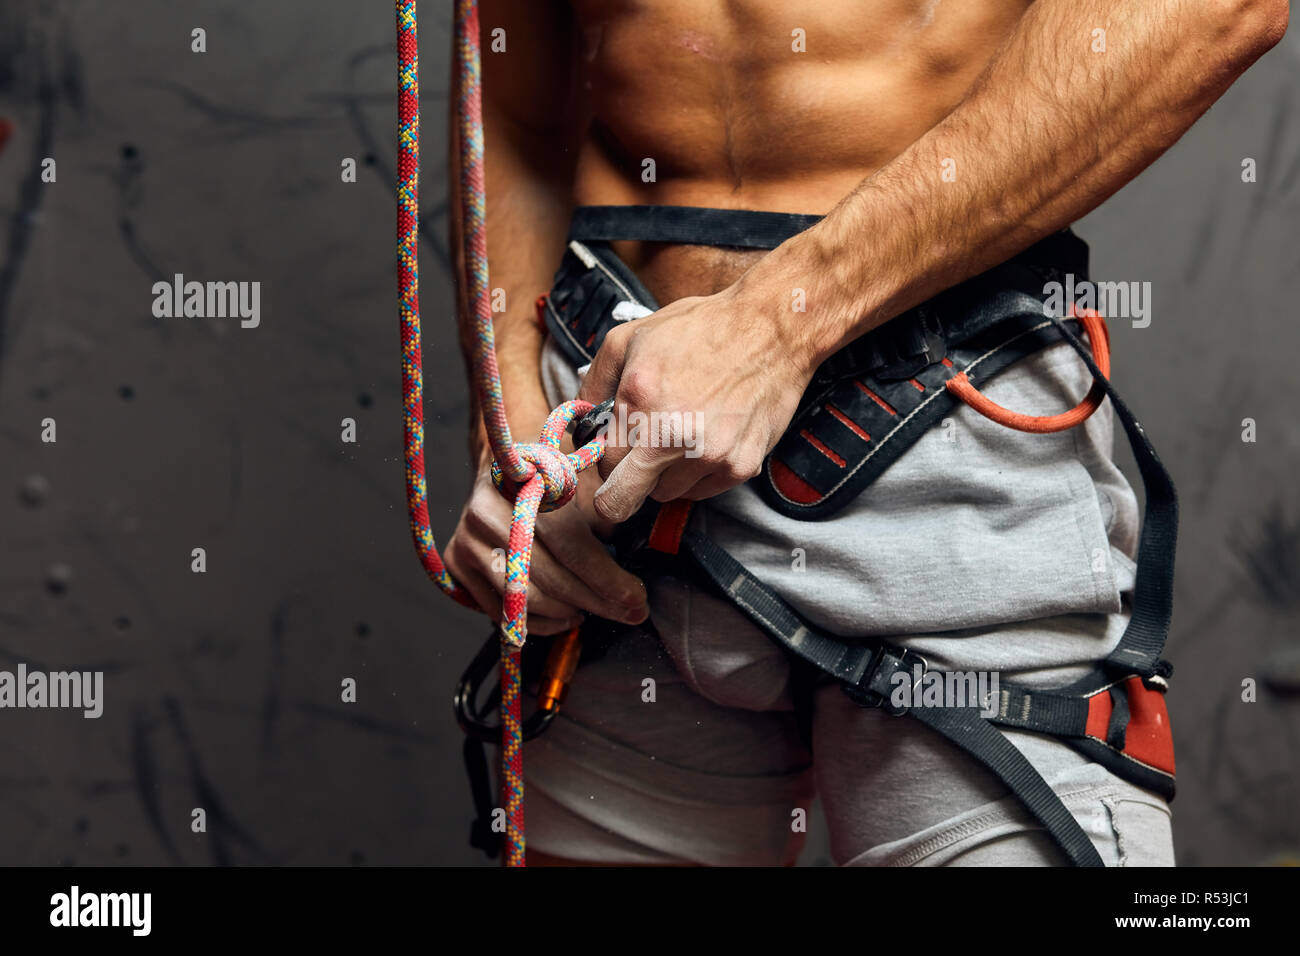 Climber s male hands with equipment during preparation for climb, close-up. Stock Photo